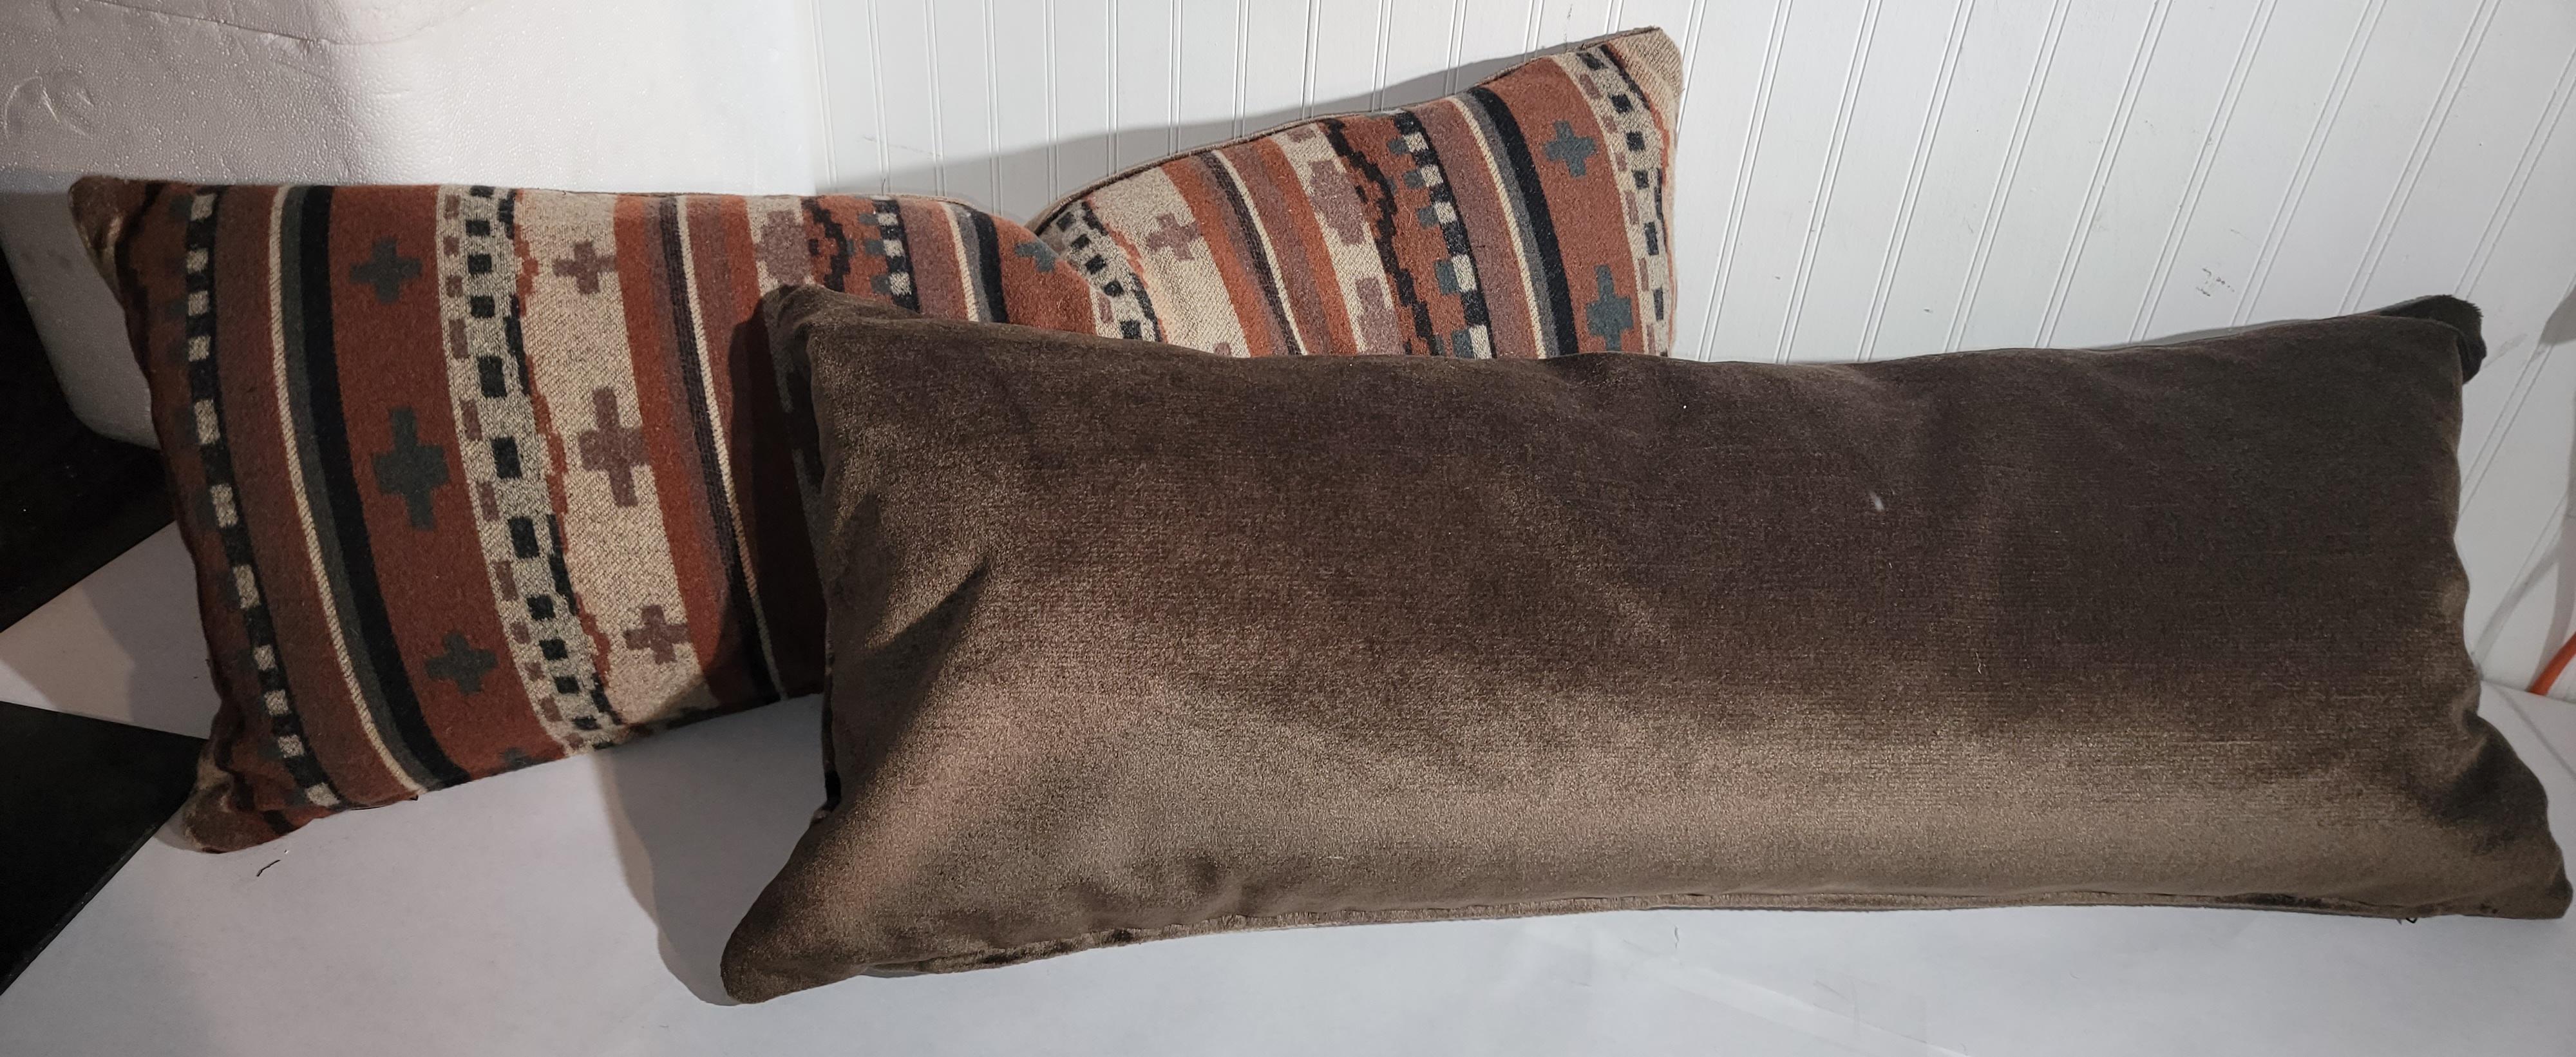 Pair of Earthy toned Mexican Indian weaving pillows with beautiful brown mohair backing. Soft to the touch and great earthy colors provide a sense of nature. The interior of the pillows is a custom made down and feather insert. 